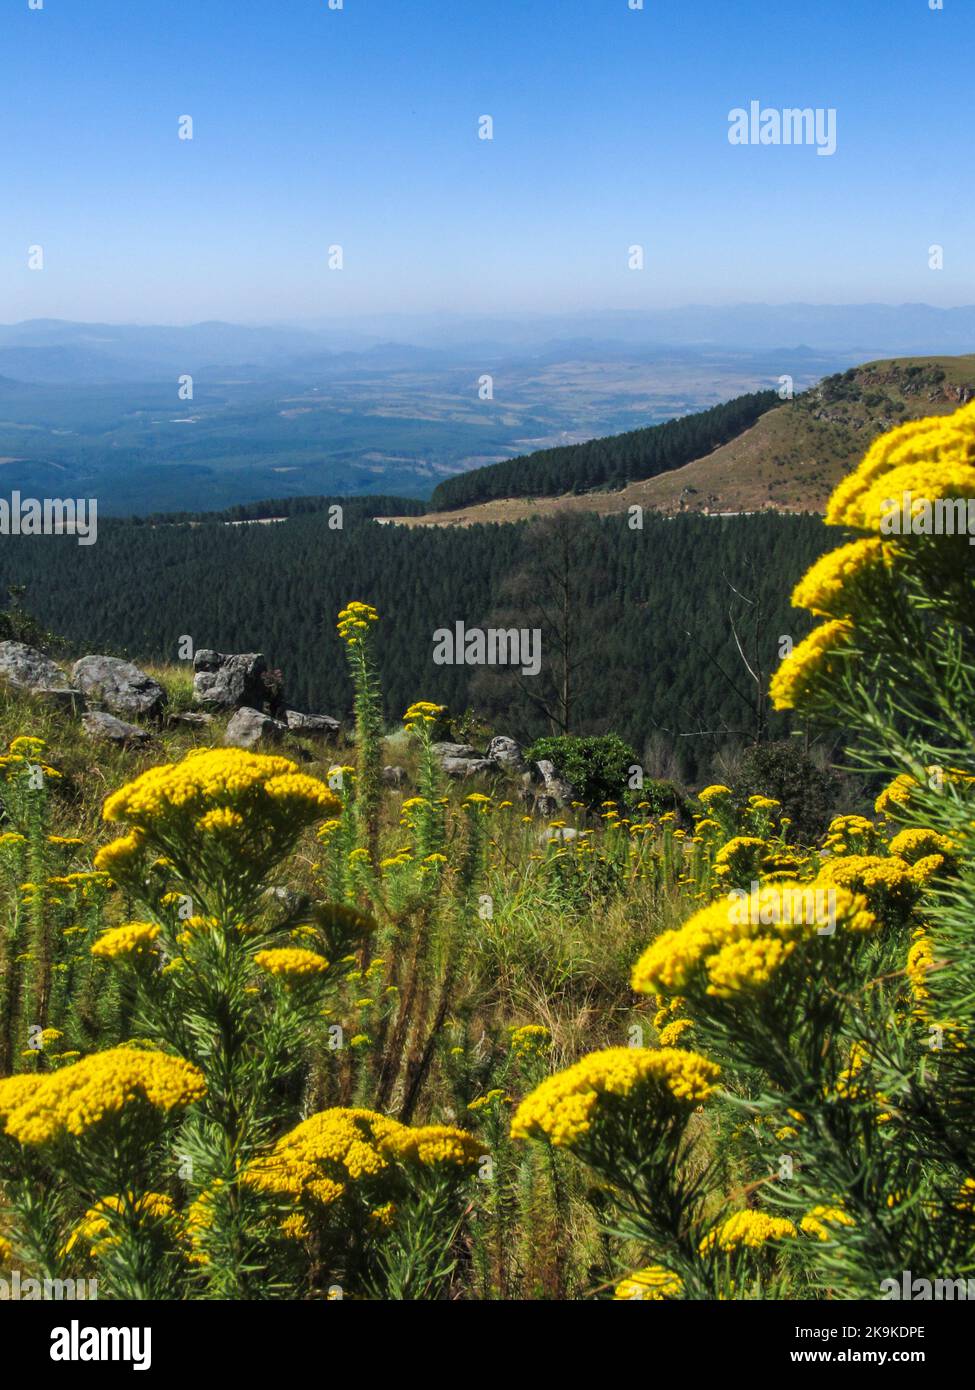 The beautiful yellow flowers of the Phymaspermum acerosum with a view of the De Kaap Valley in the background Stock Photo